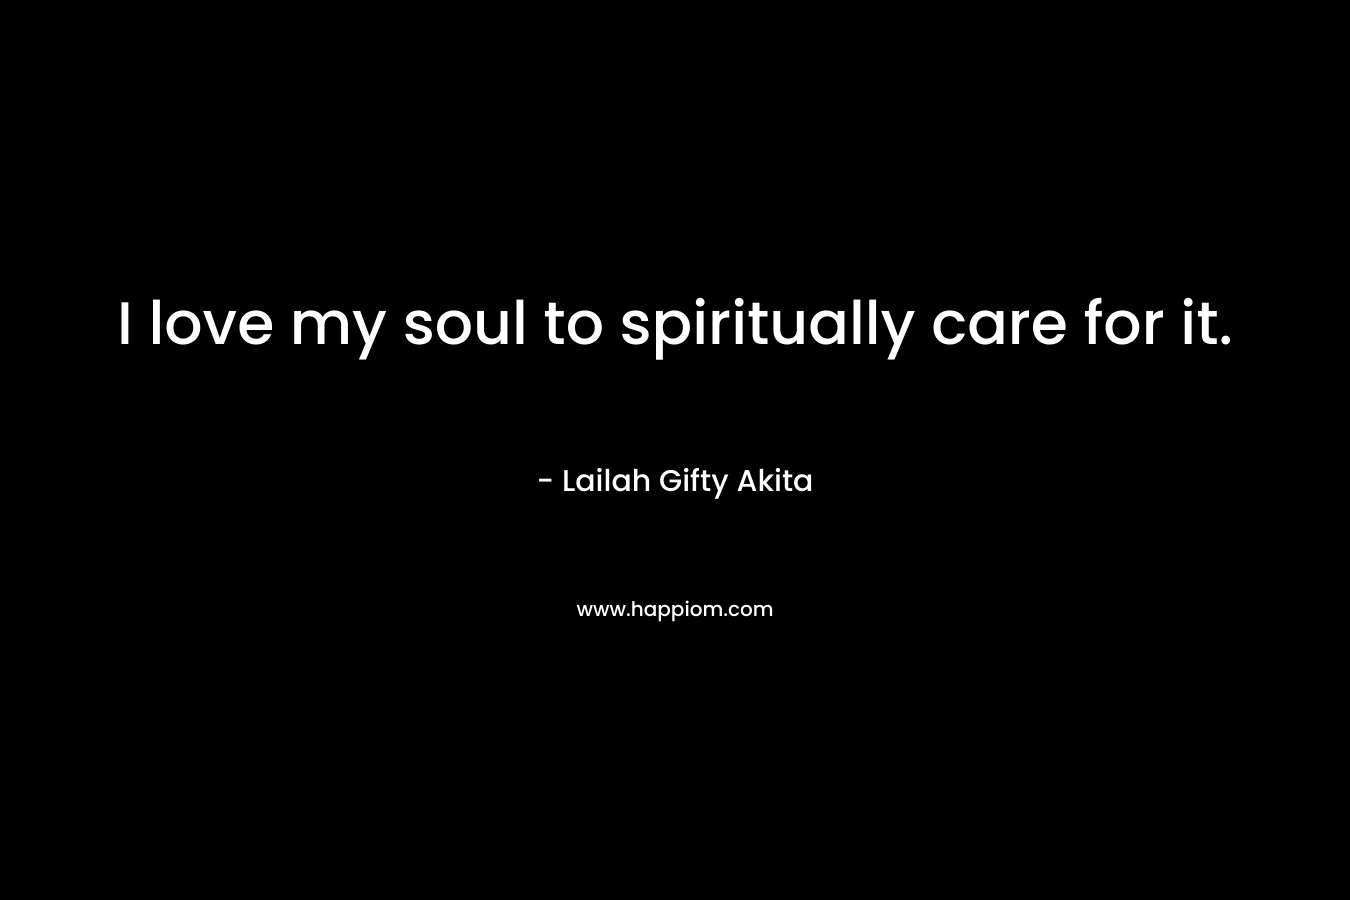 I love my soul to spiritually care for it.